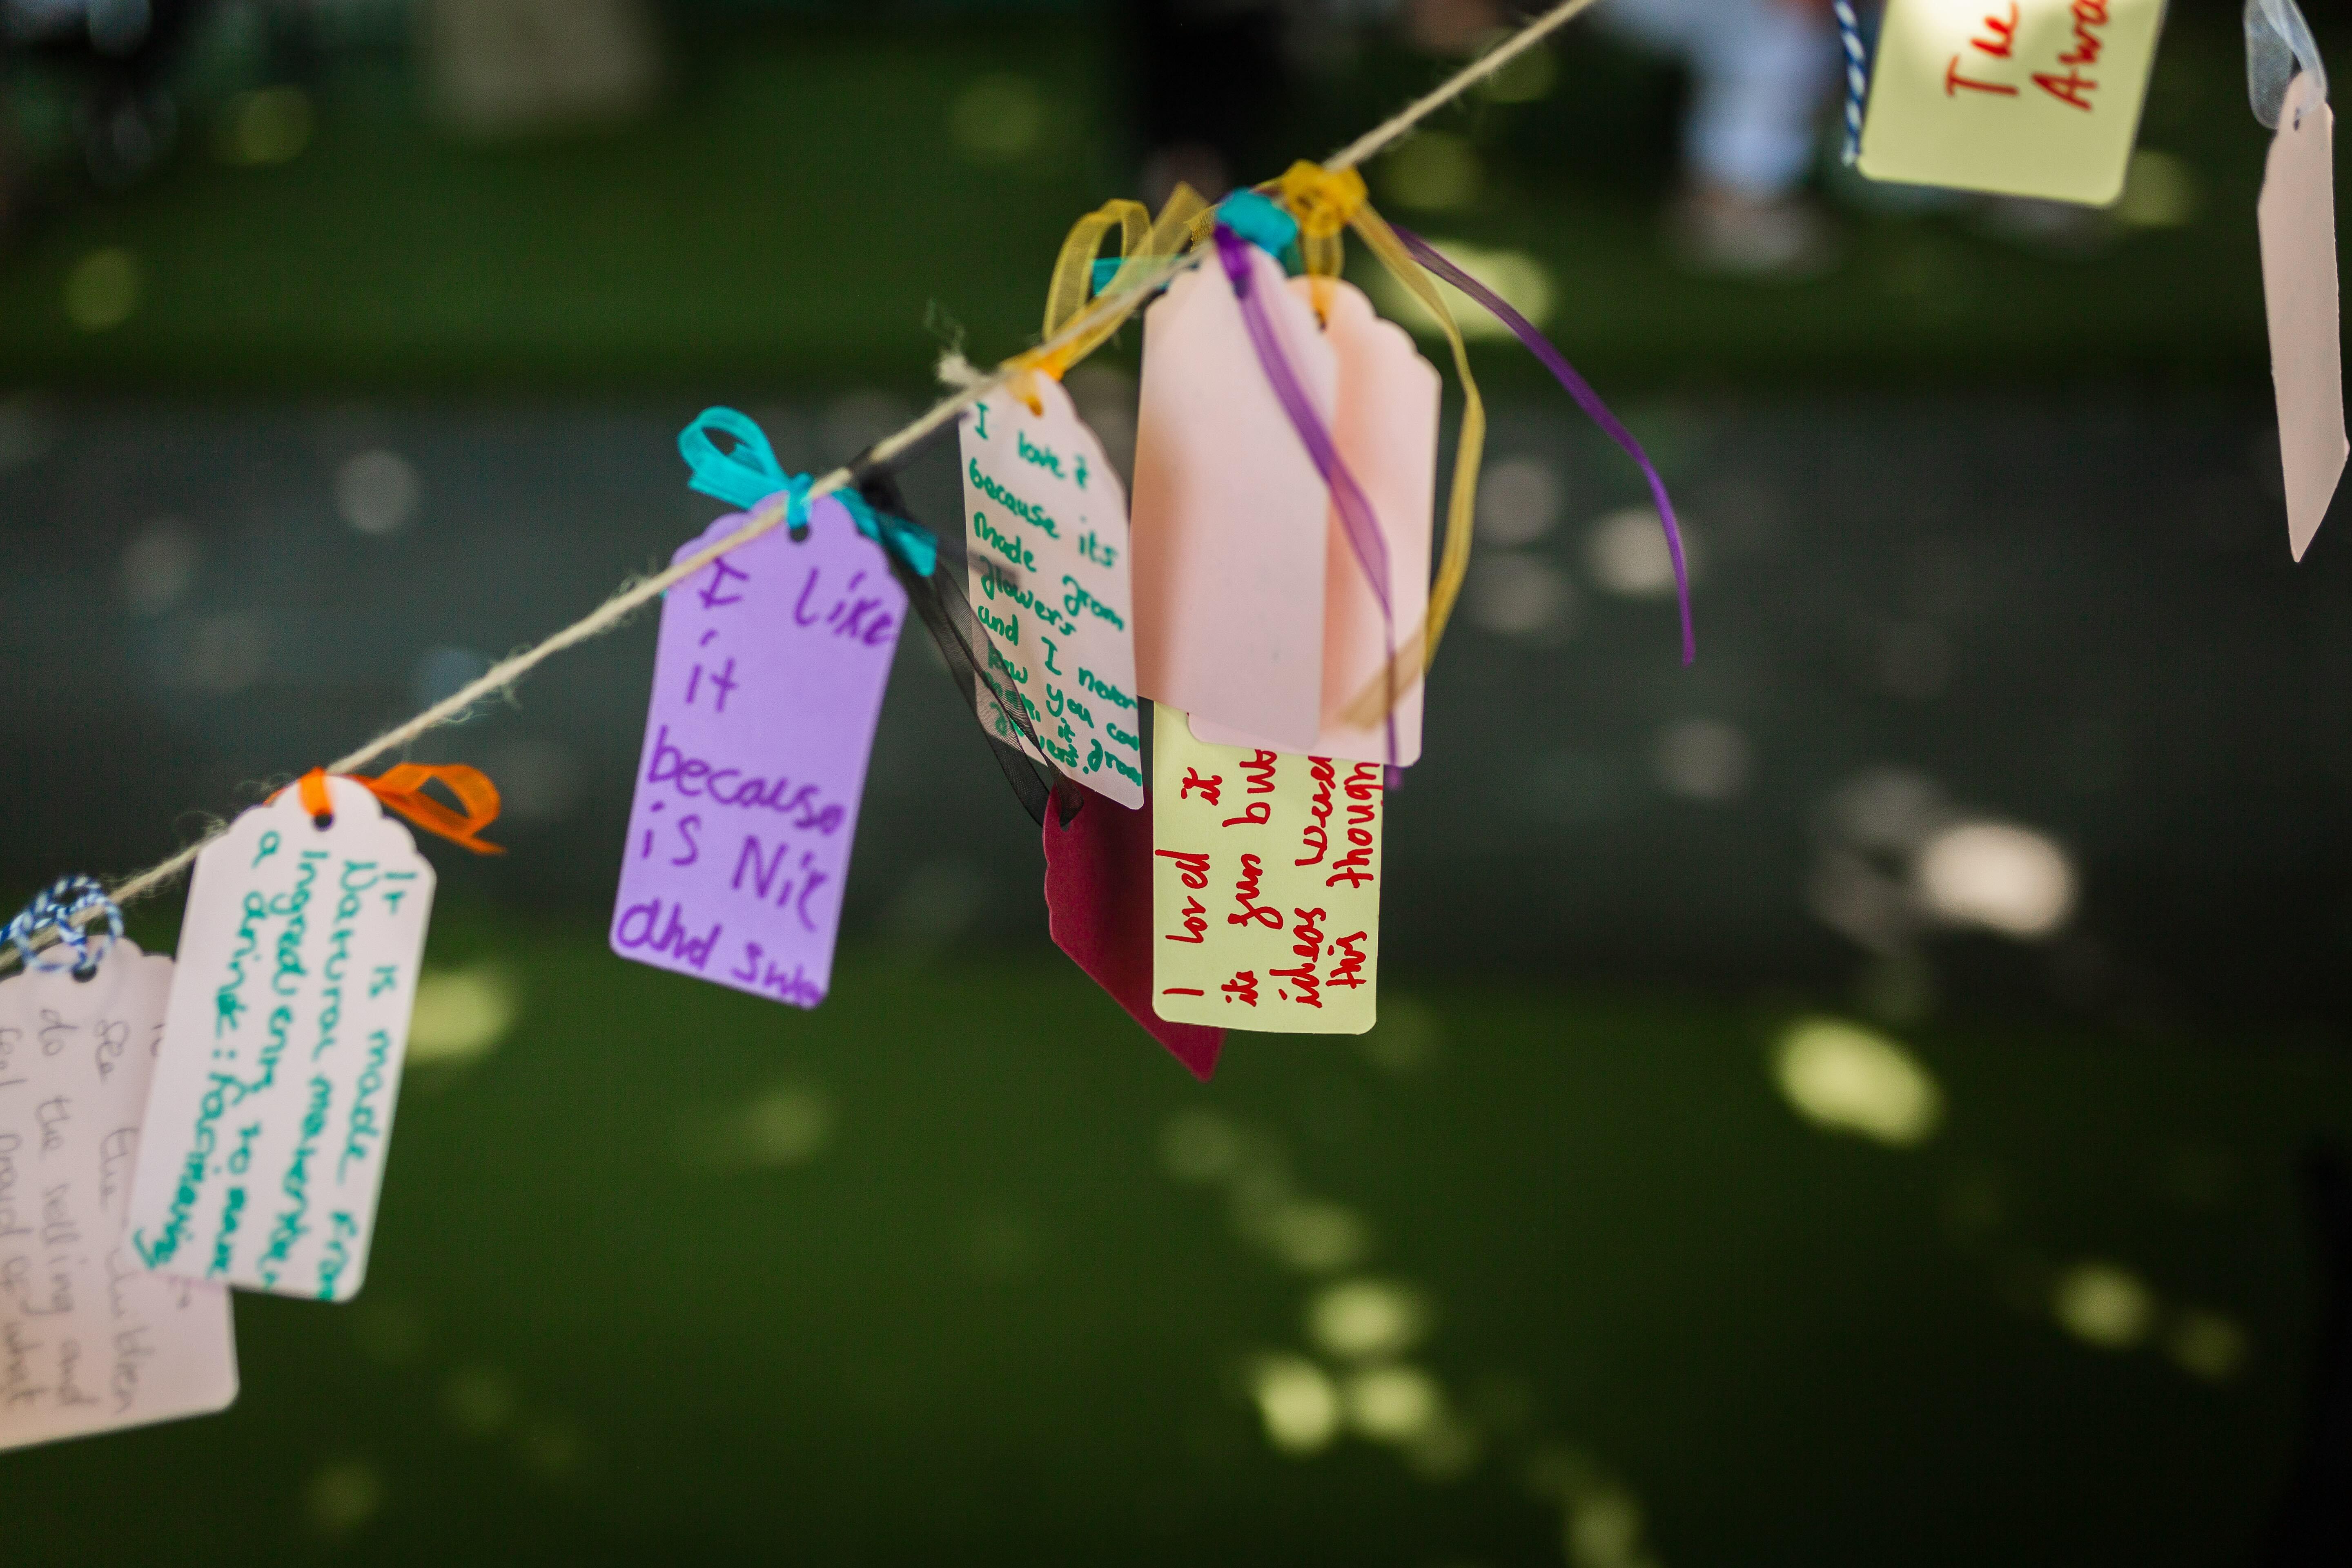 A number of small cards covered in writing hanging on a string